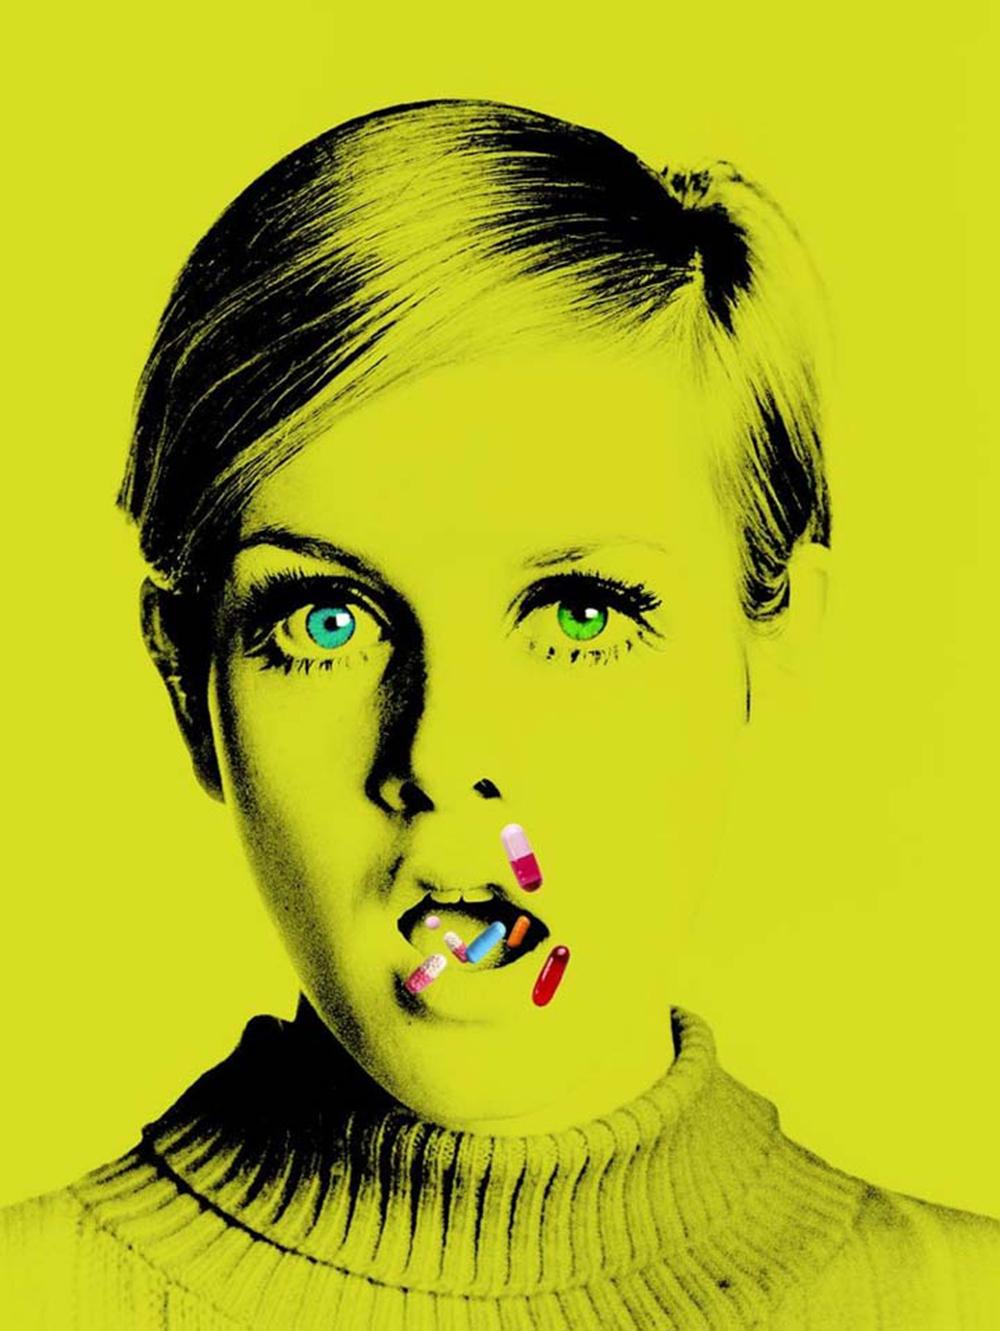 The Drugs Don’t Work

By BATIK

Archival pigment pop art print of the 1960s supermodel Twiggy signed & limited edition.

BATIK is a London based fine artist and image maker.

Produced from the original transparency
Certificate of authenticity